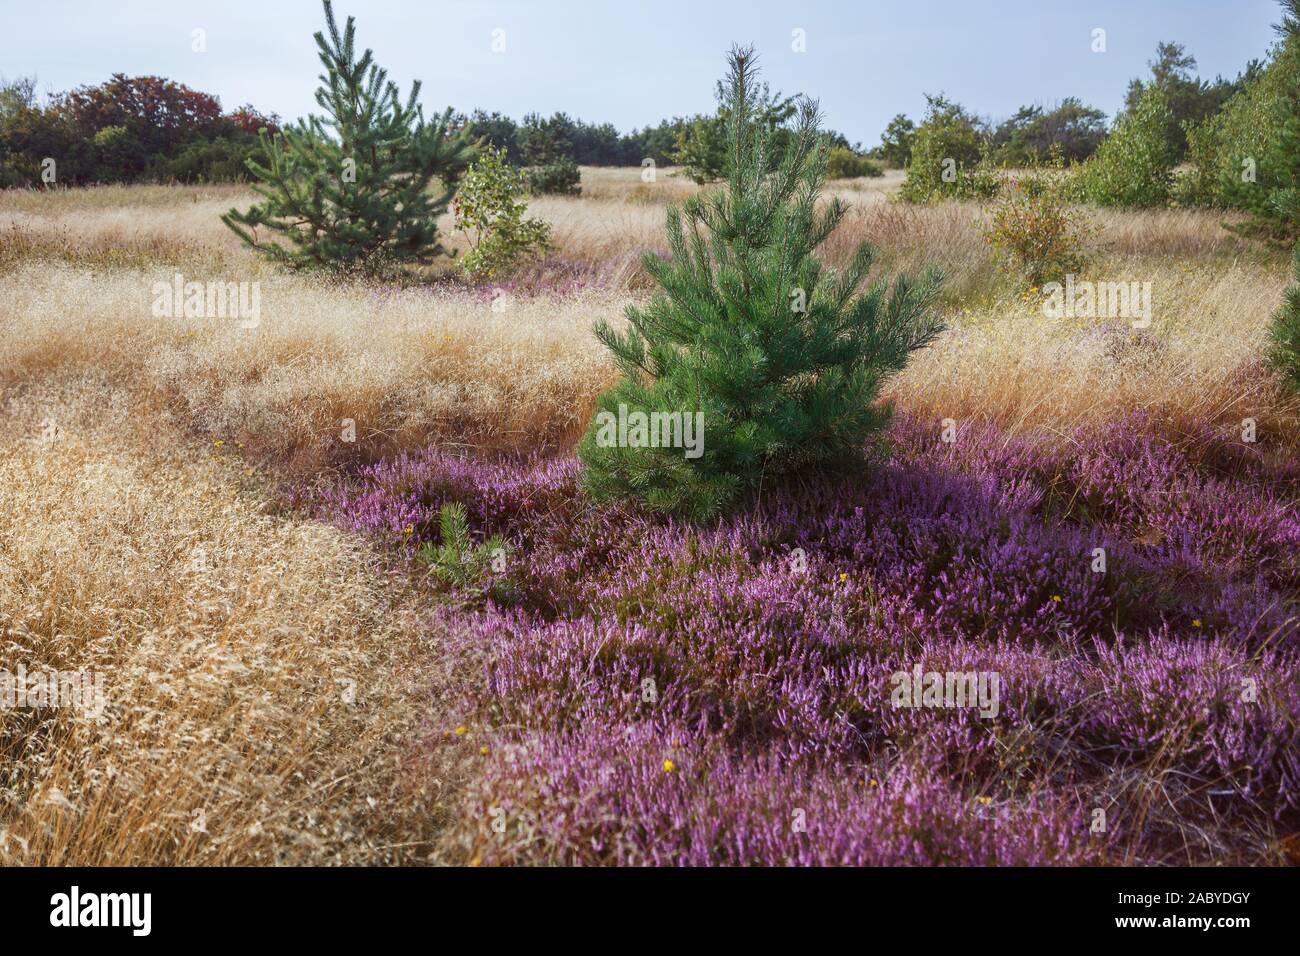 Heather flower and grass meadow with lone pine trees Stock Photo